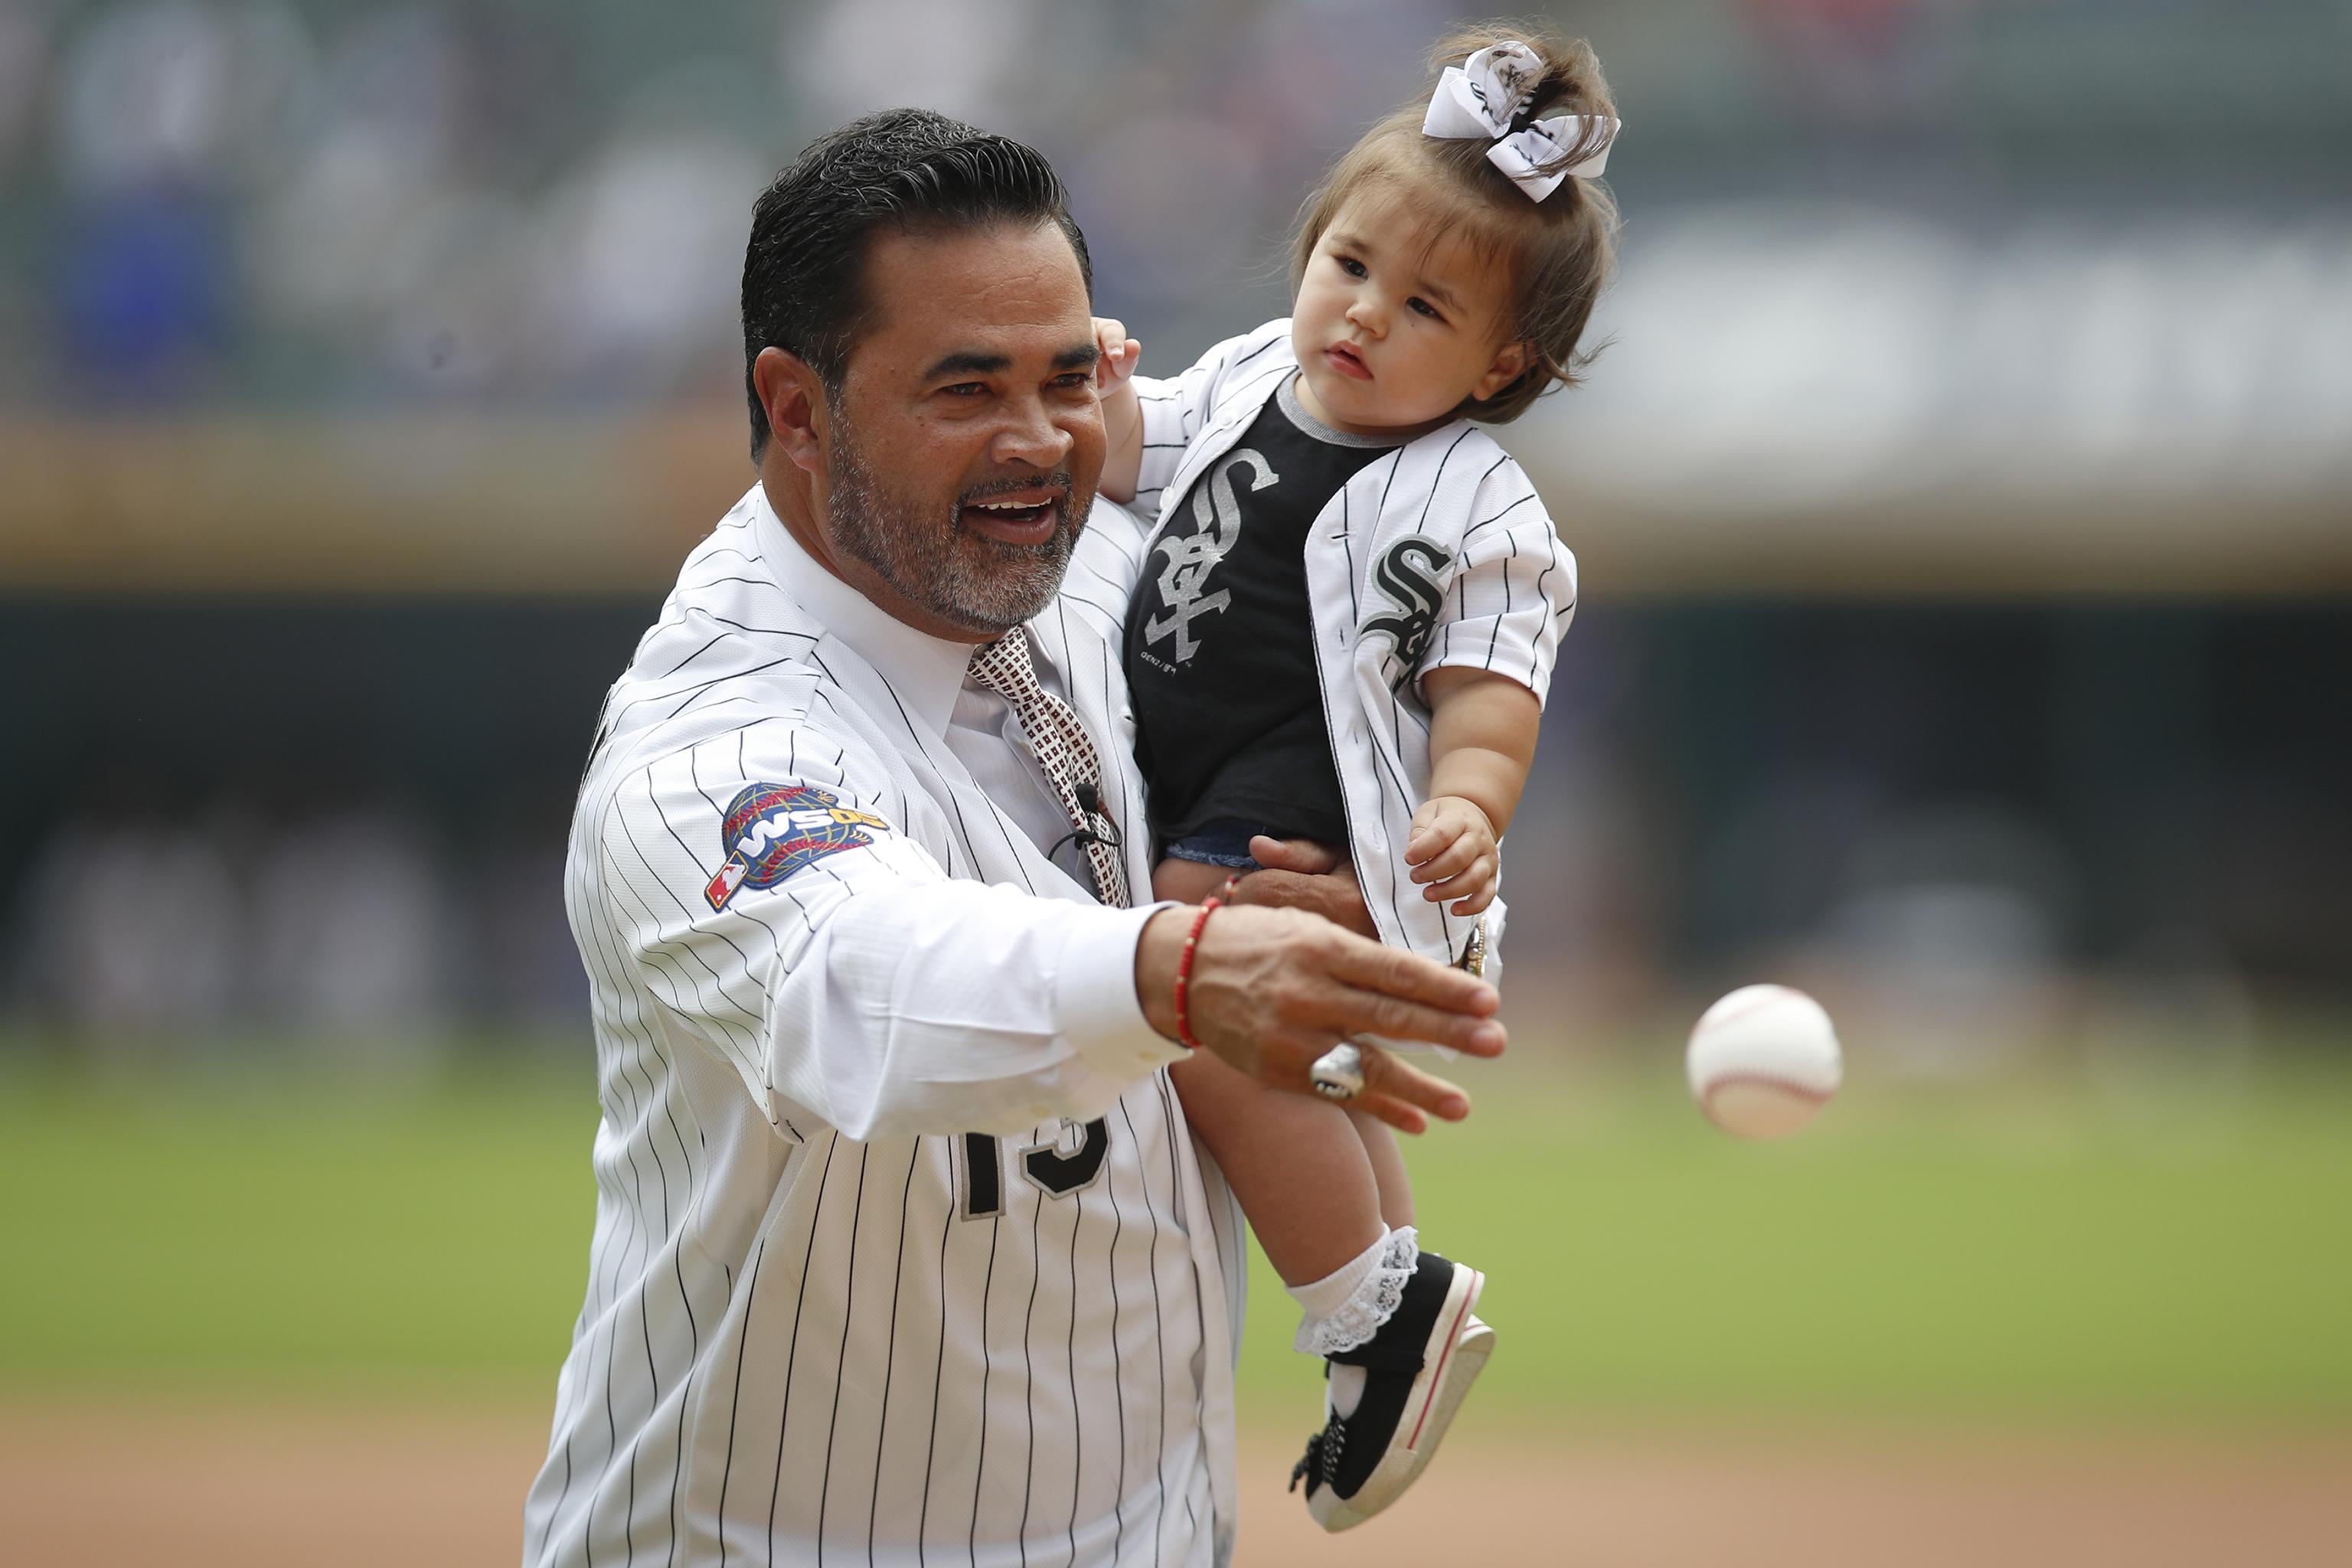 Nick Swisher Isn't the Only Player Ozzie Guillen Had a Problem With